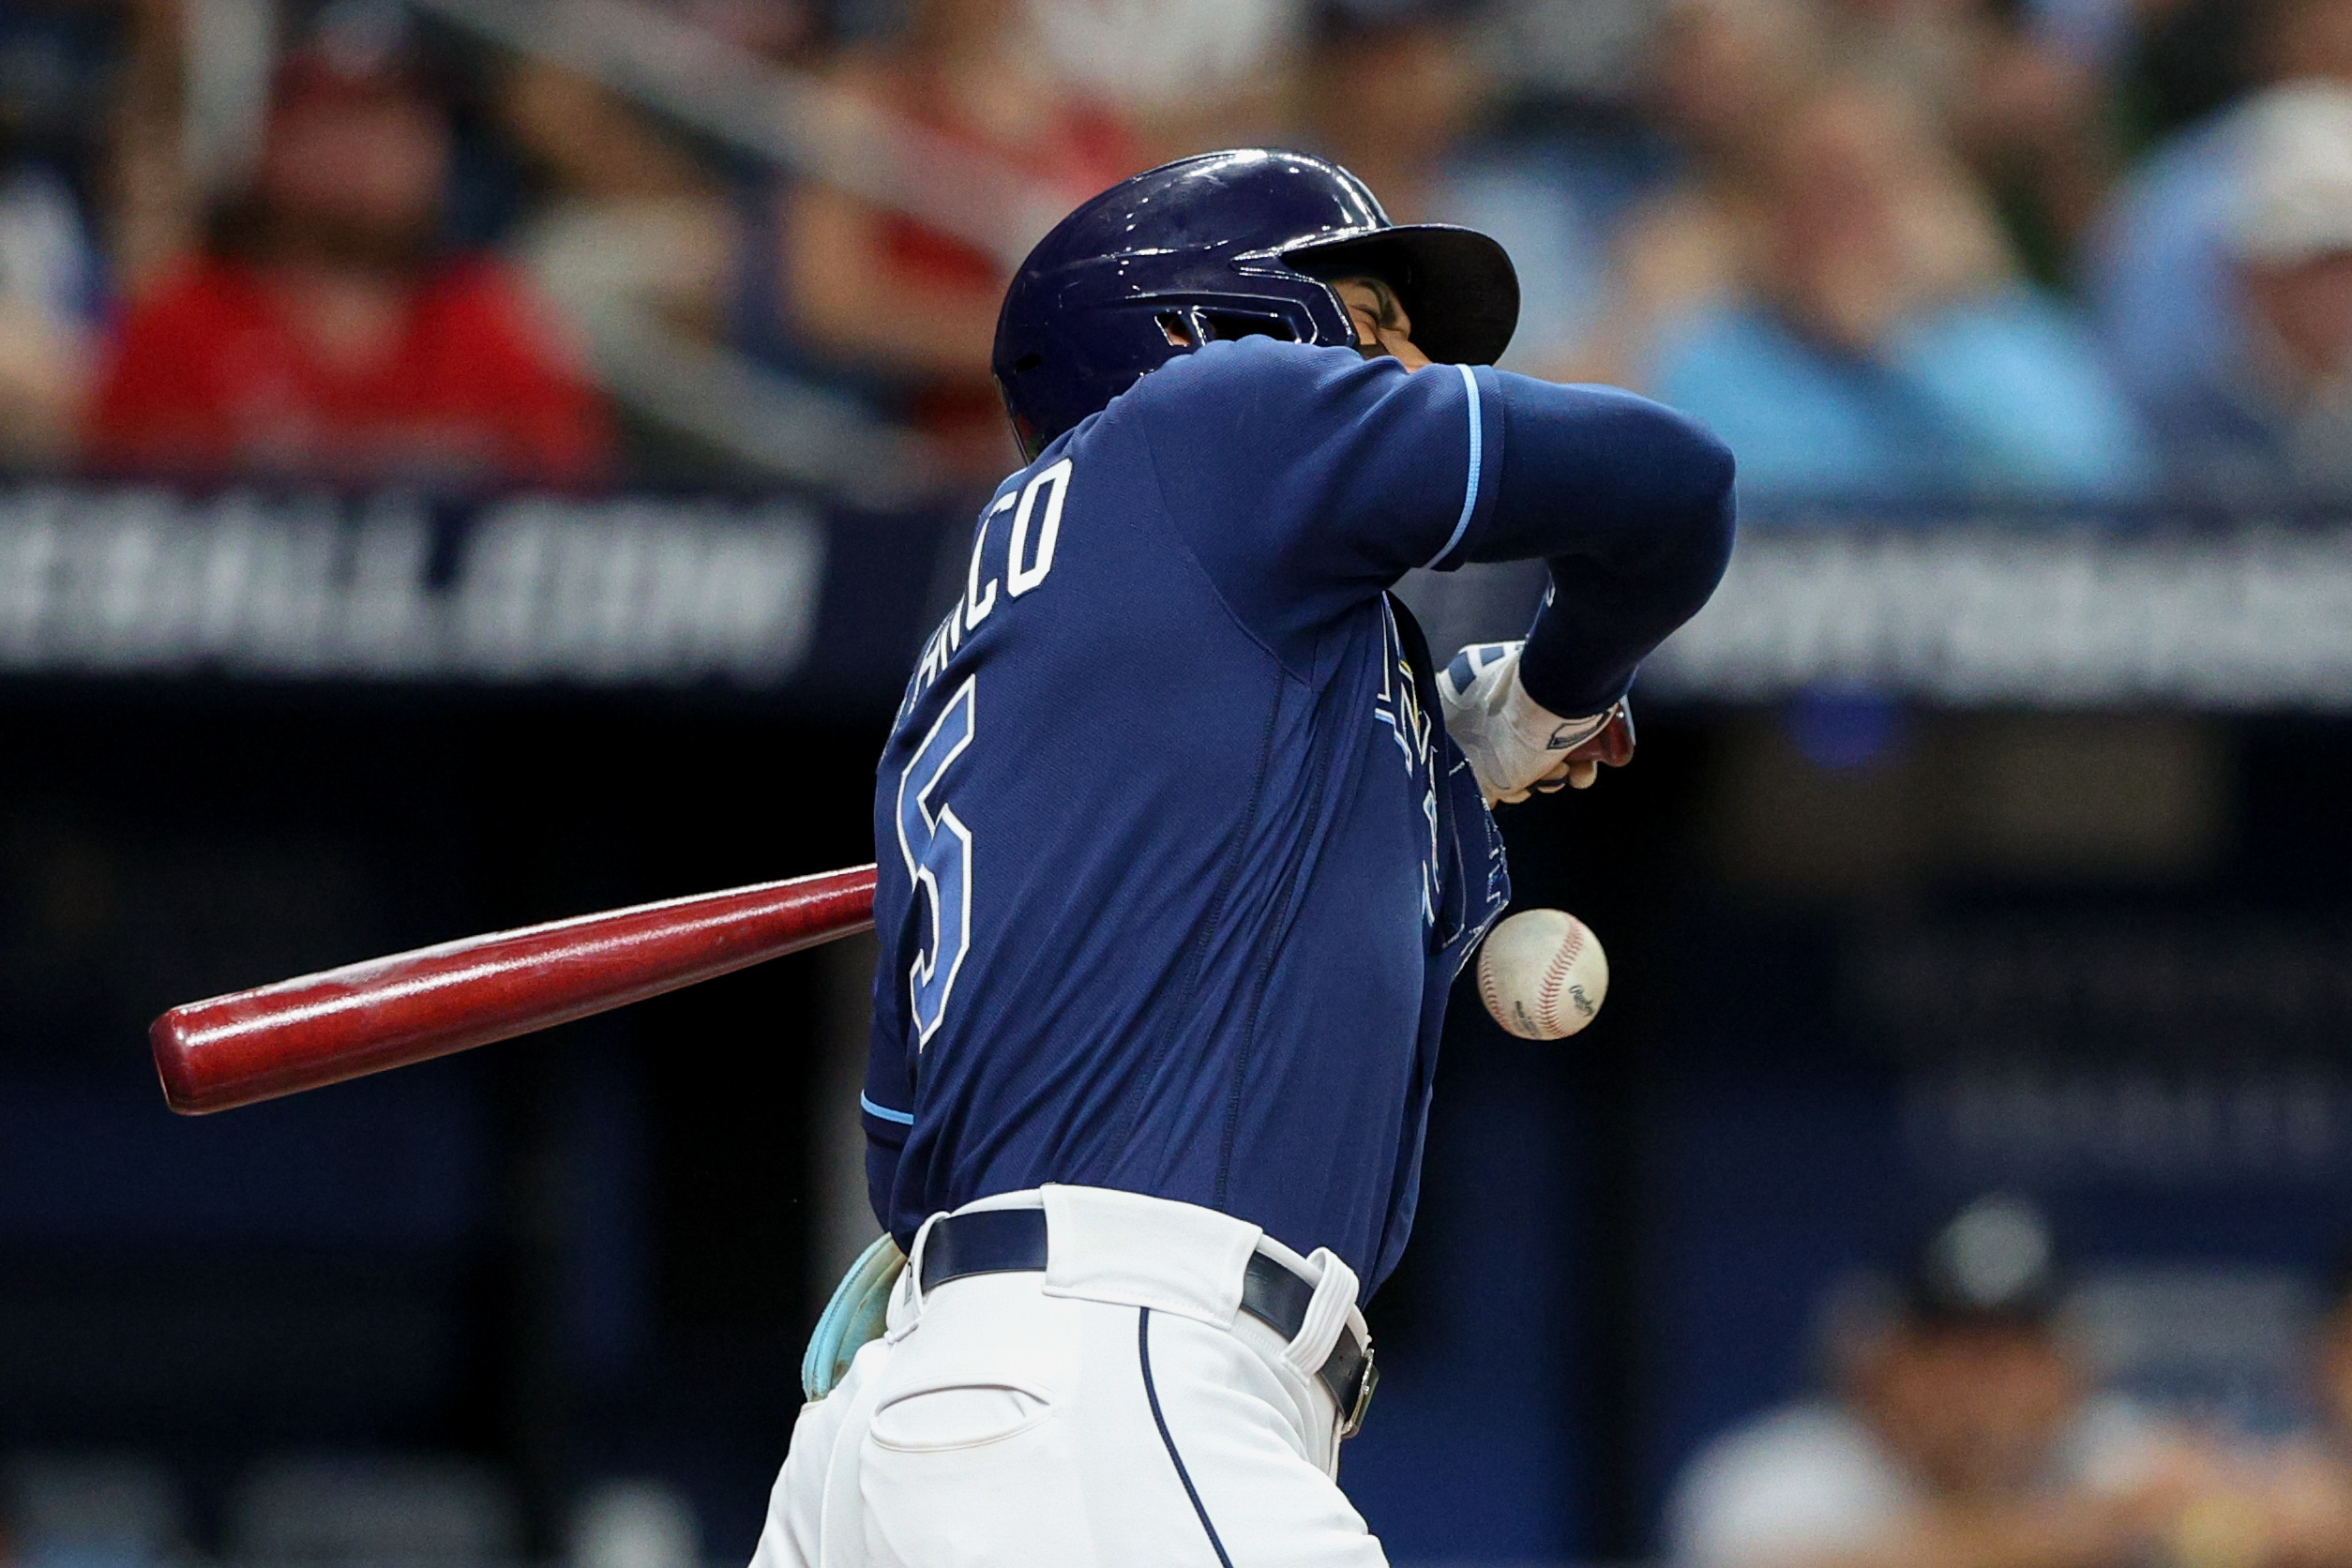 The Atlanta Braves set new franchise record for homers against Rays